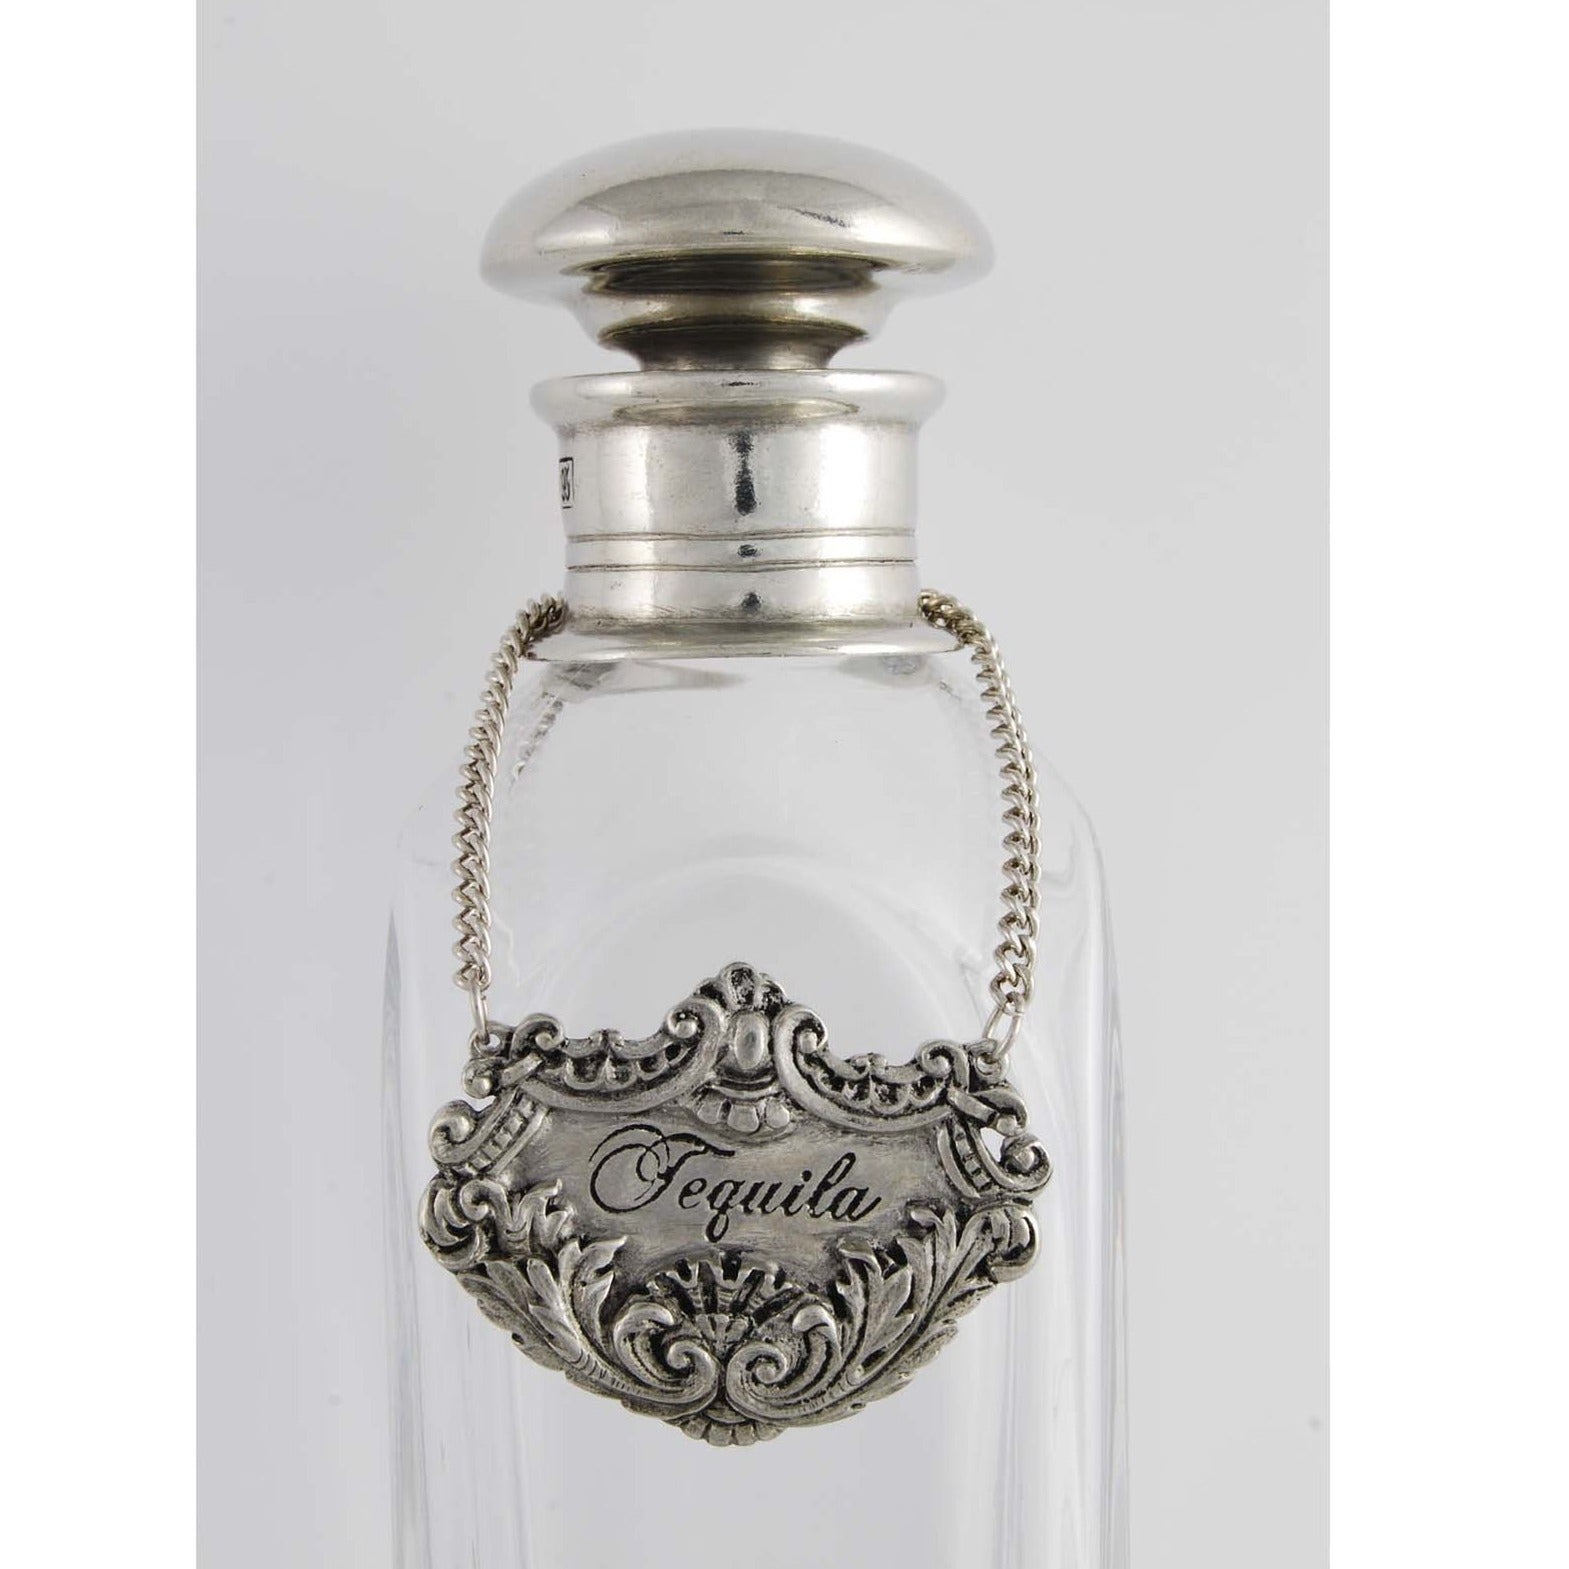 Pewter Grand Nobility Decanter Tags- Timothy De Clue Collection